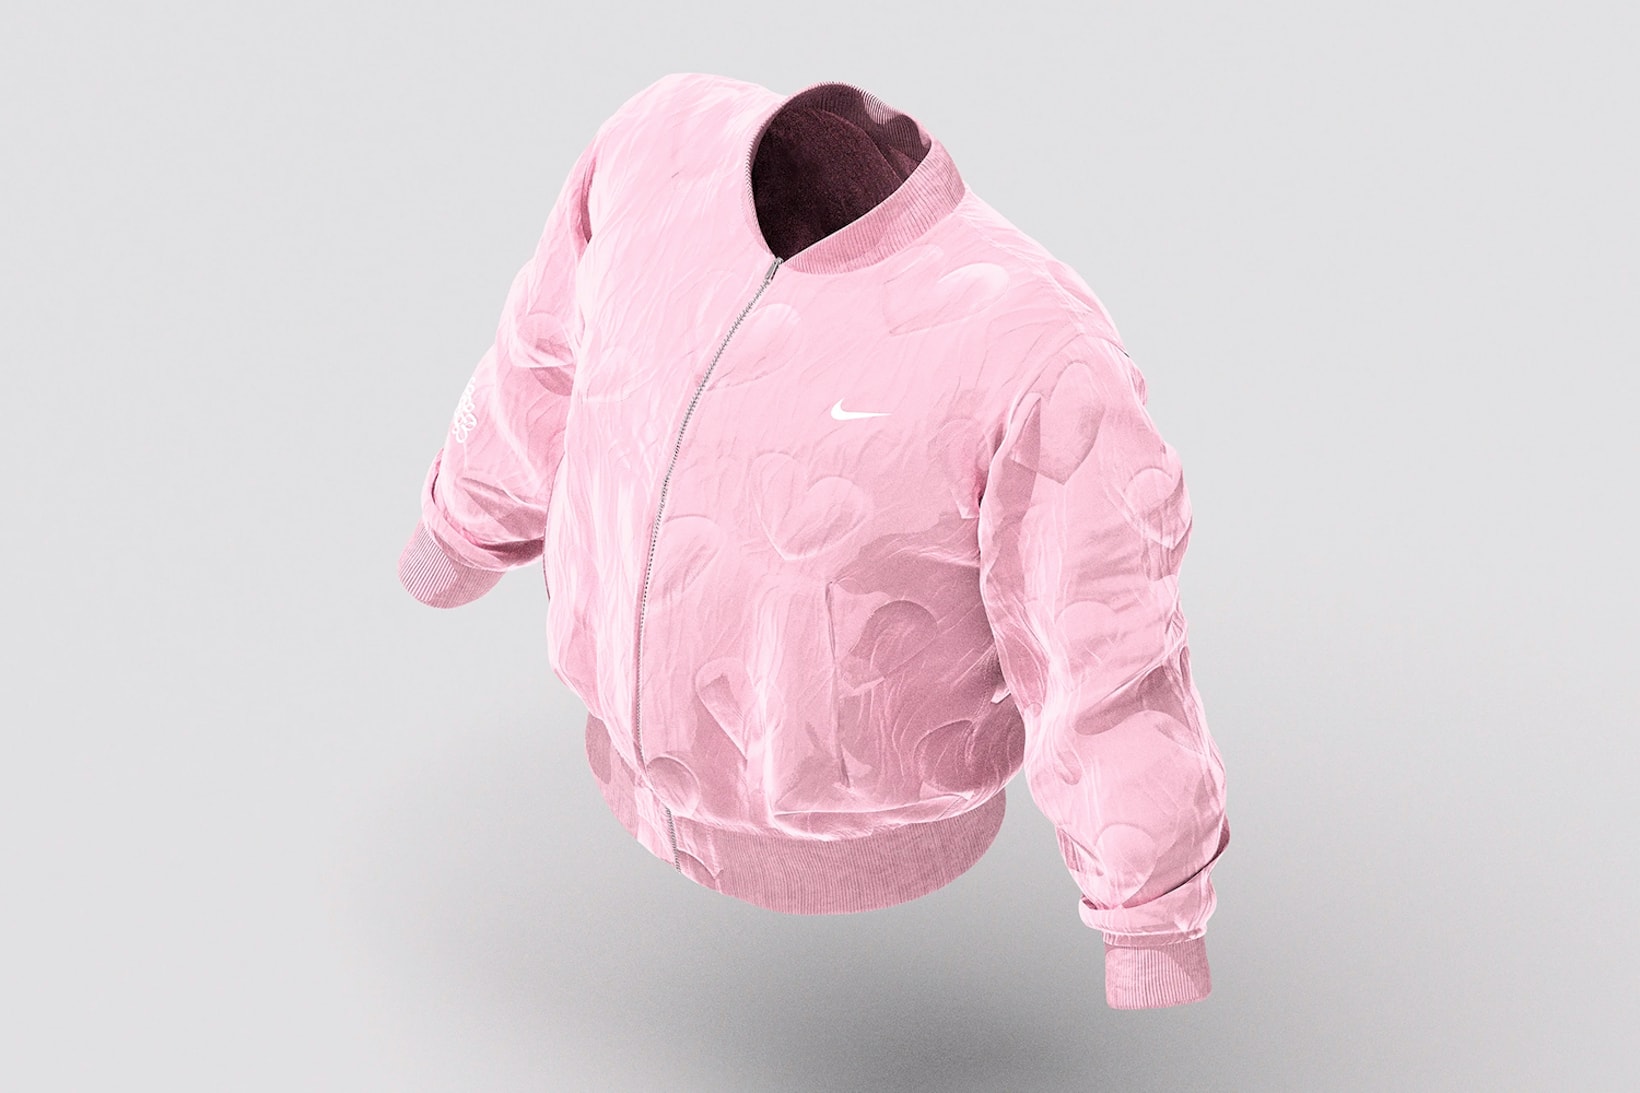 Drake Nike Certified Lover Boy Album Merch Collection Collaboration jacket pink